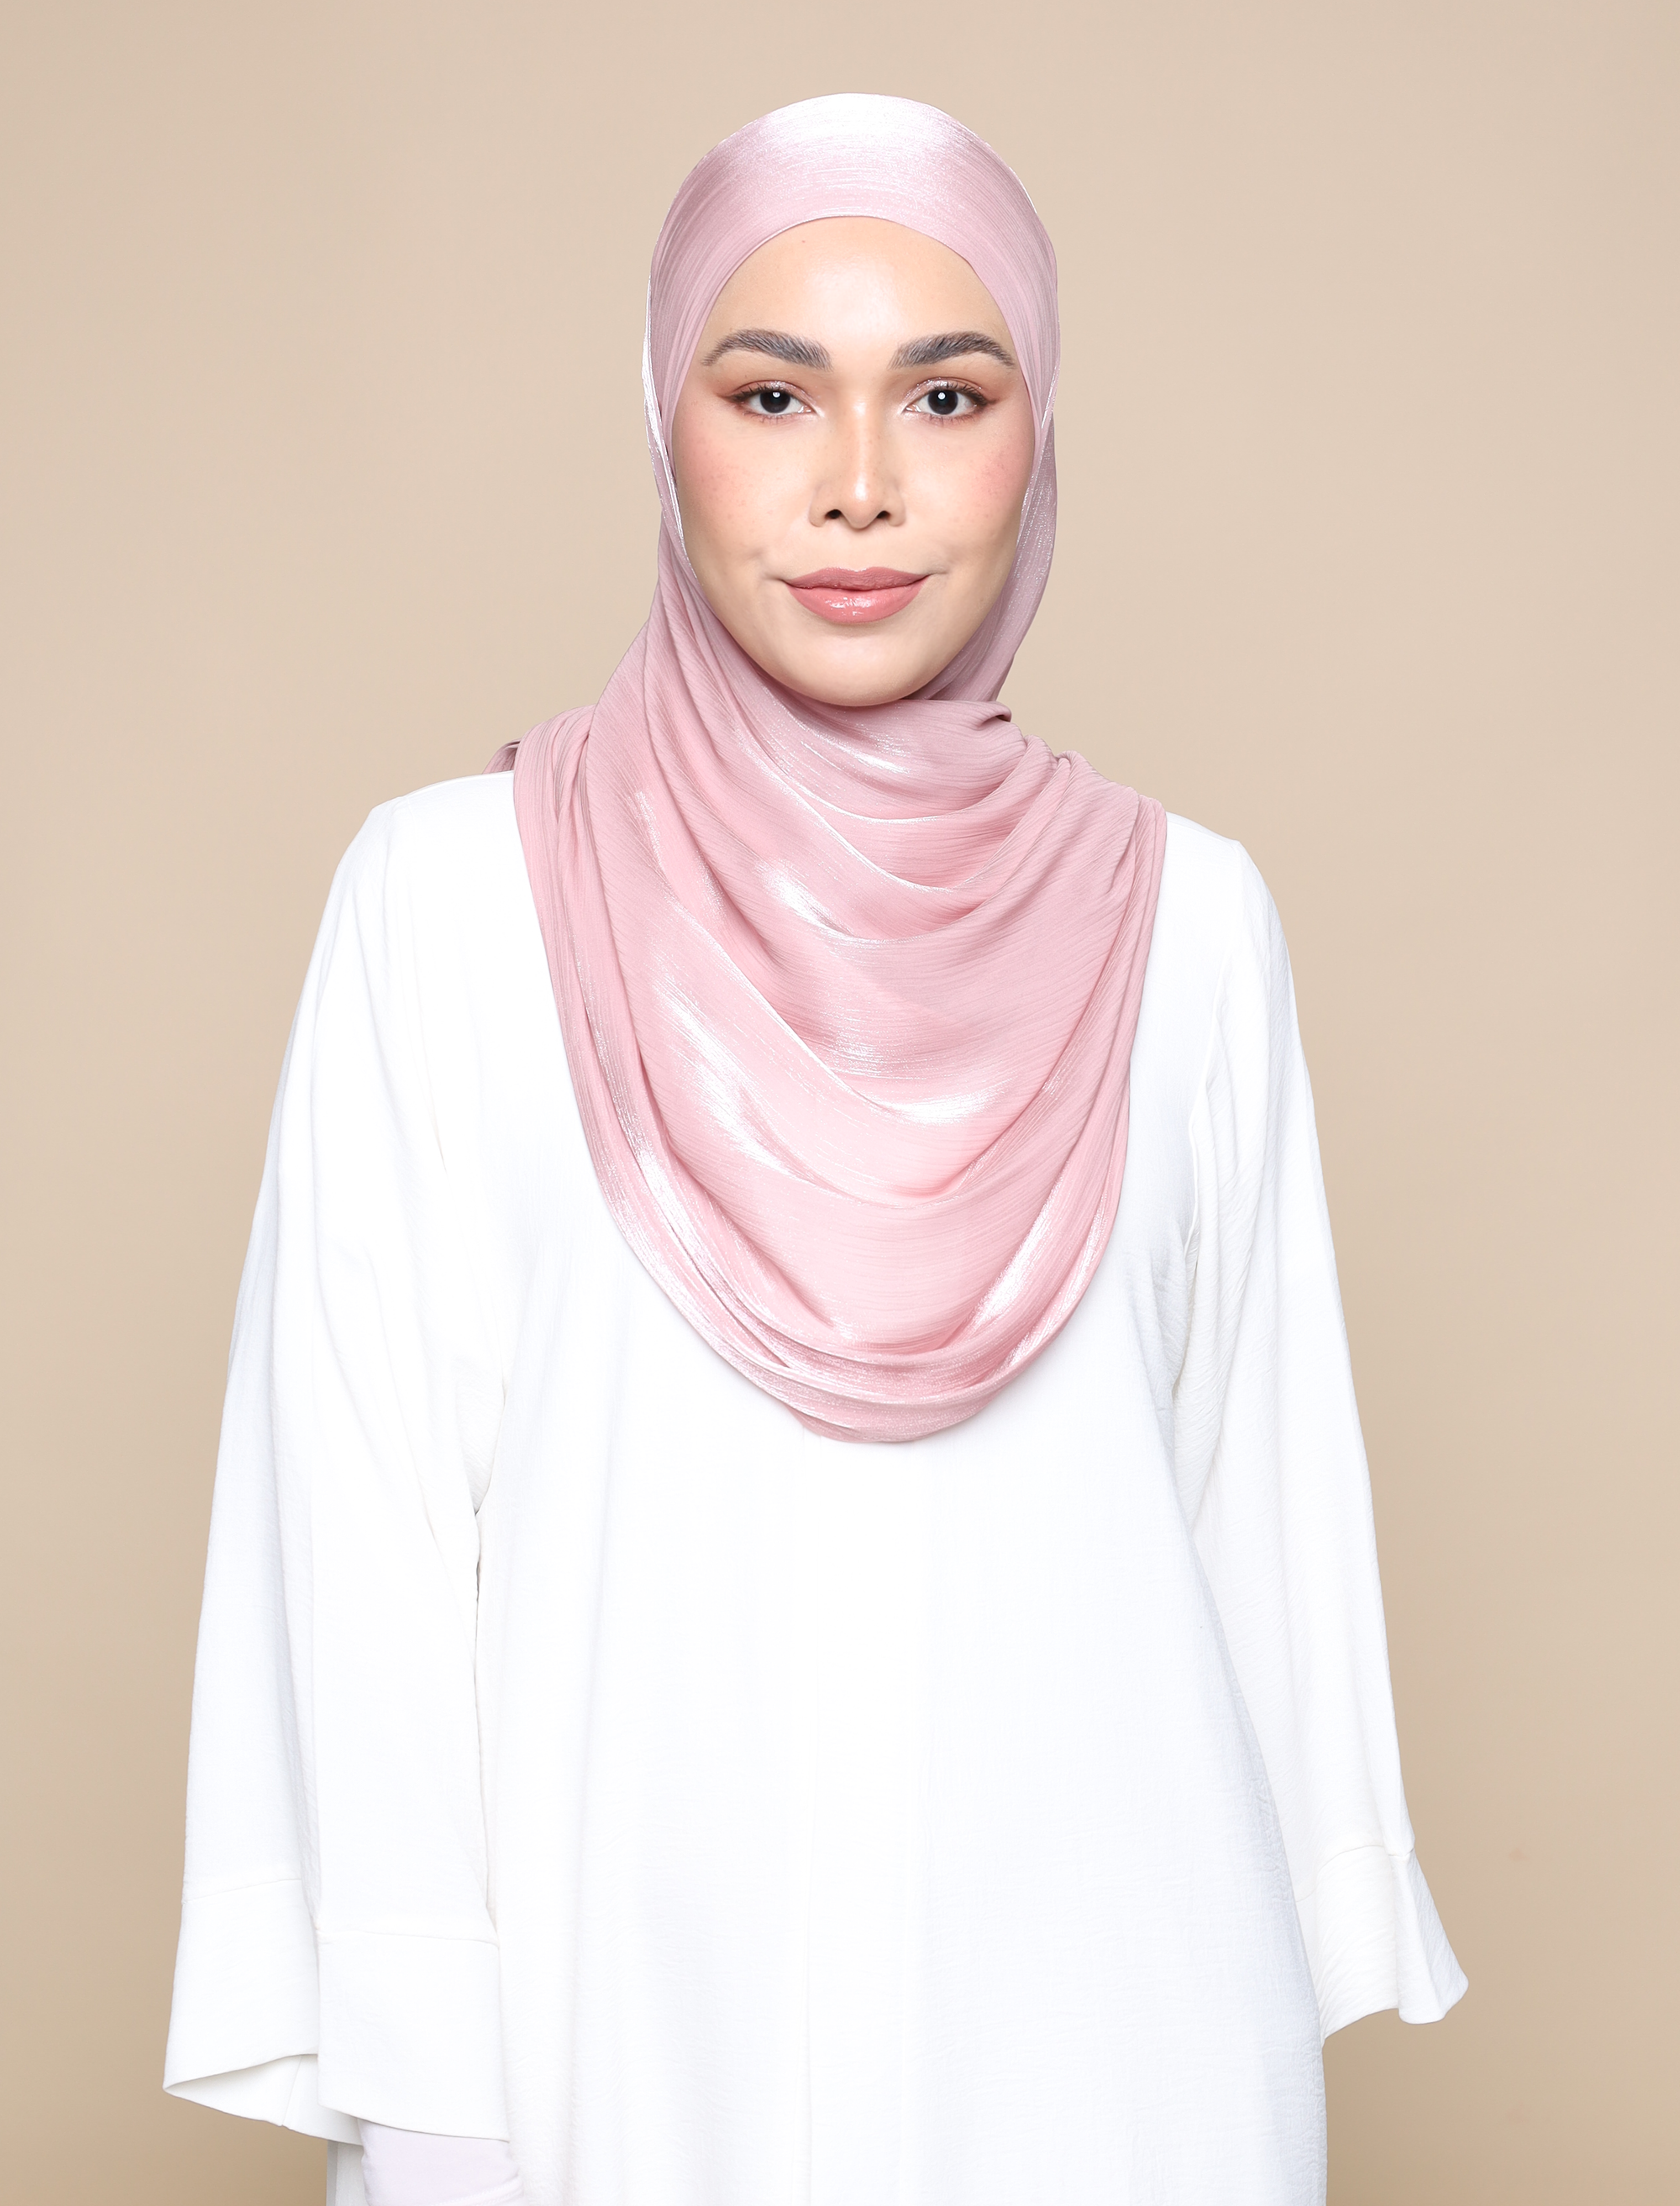 Shimmer Satin Lux Square Shawl - Dusty Pink